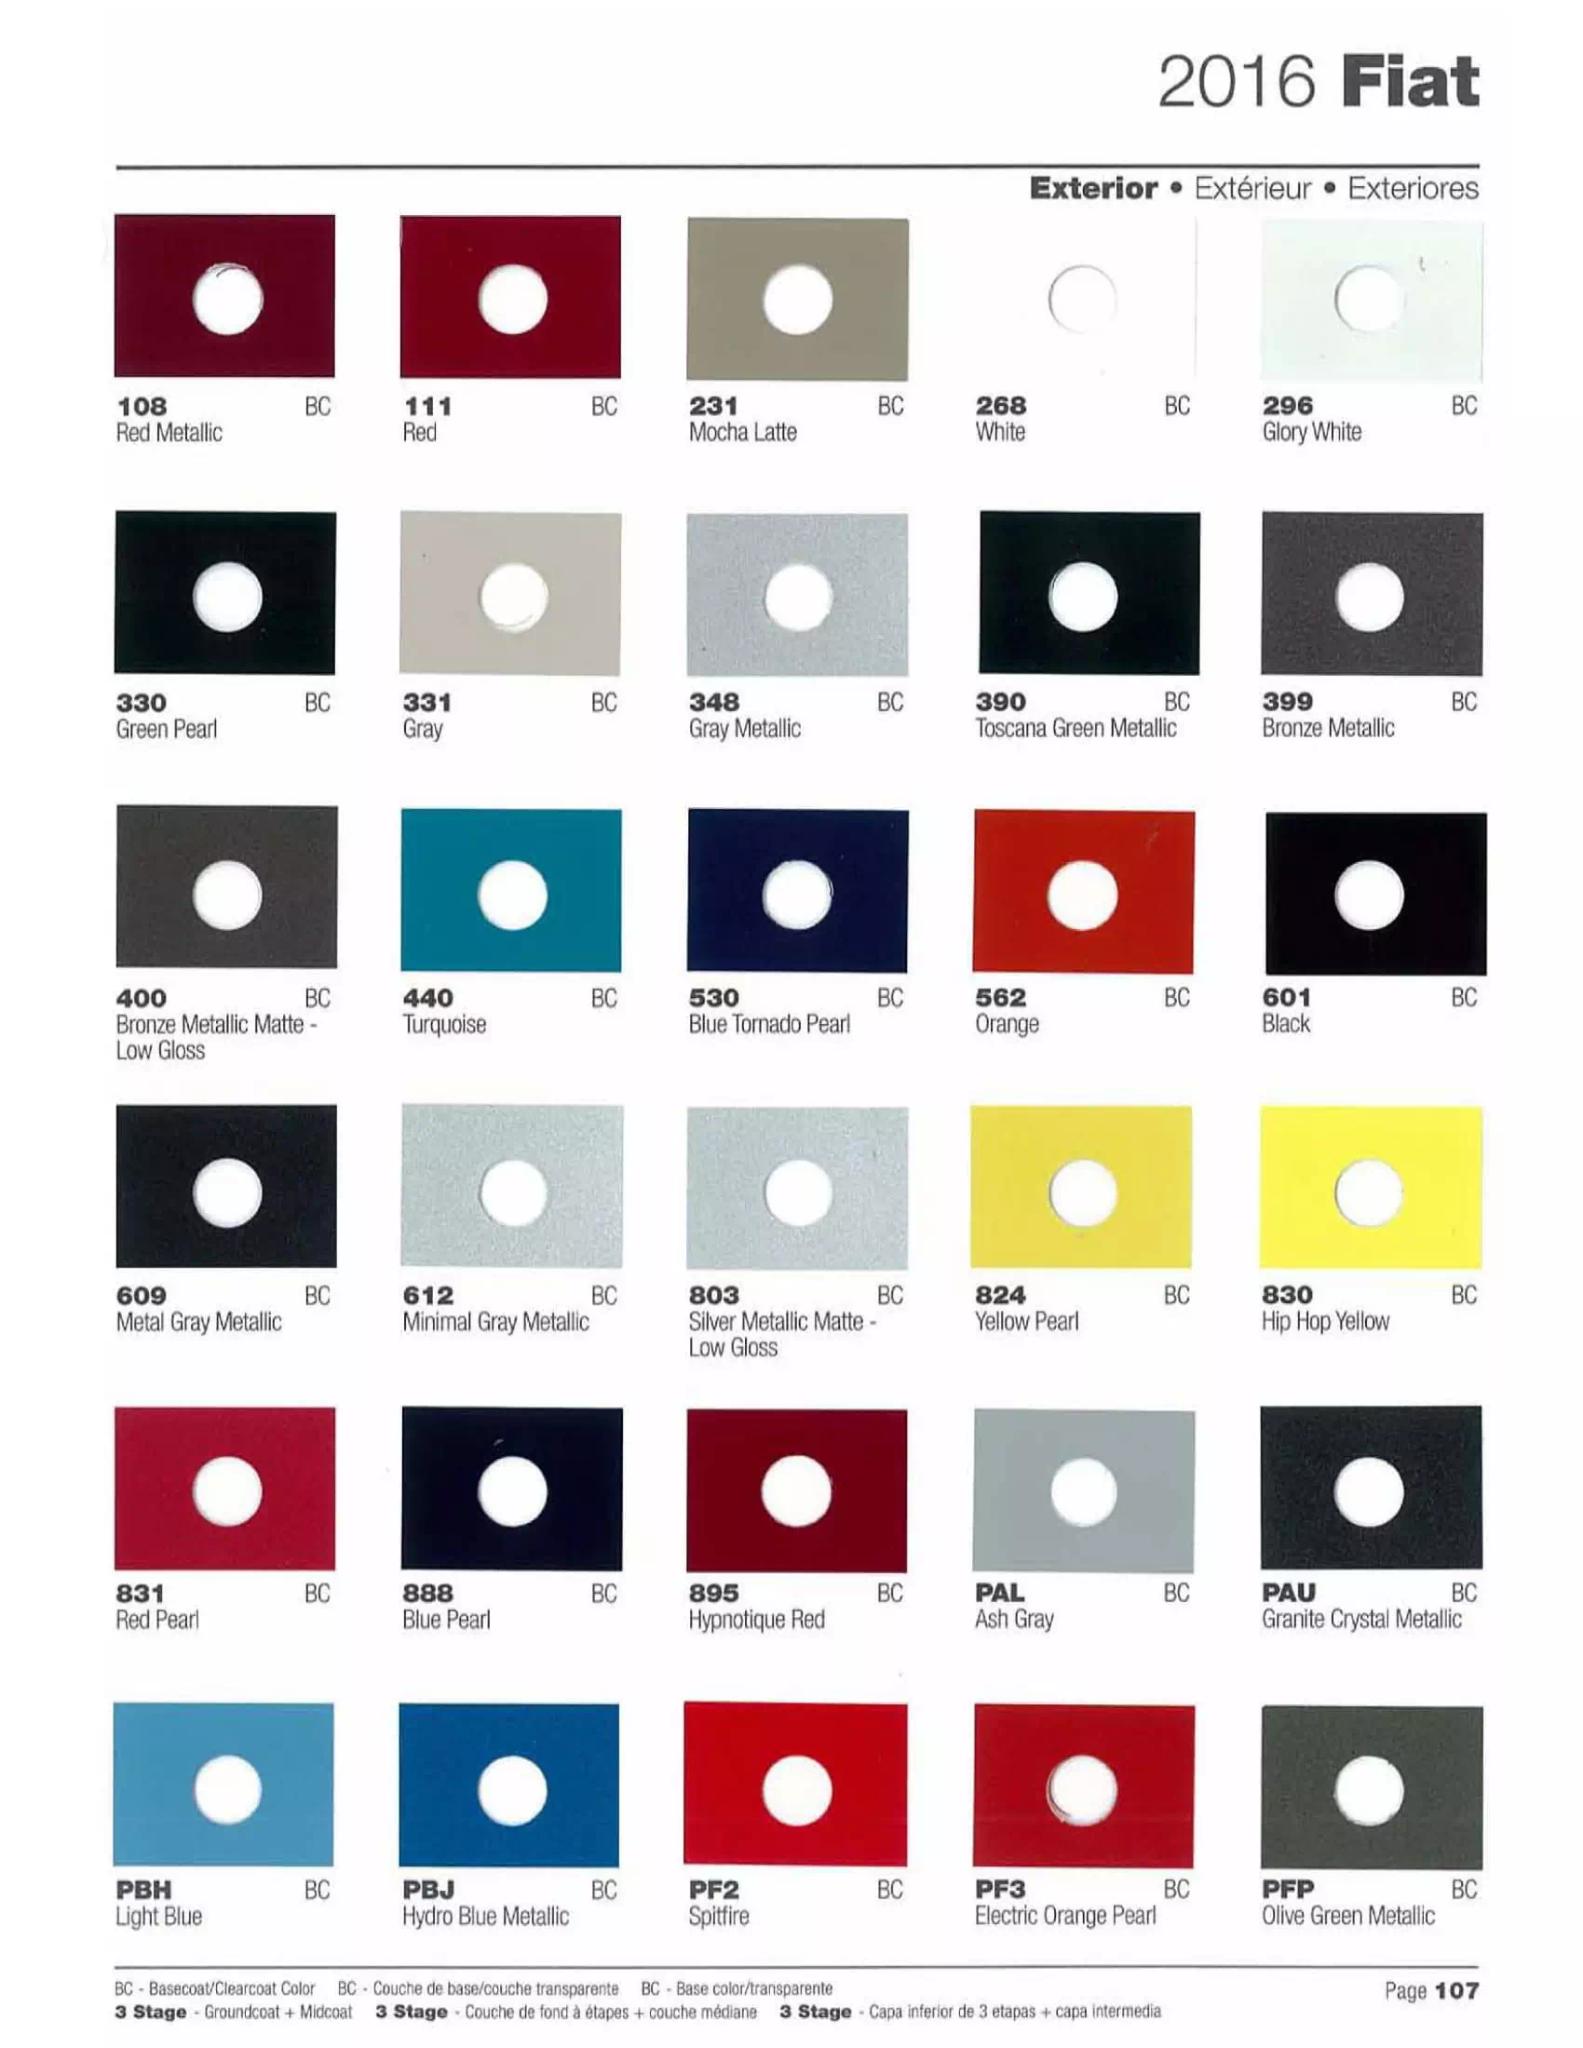 oem paint codes, color charts, and color names along with mixing stock numbers for 2016 fiat colors.